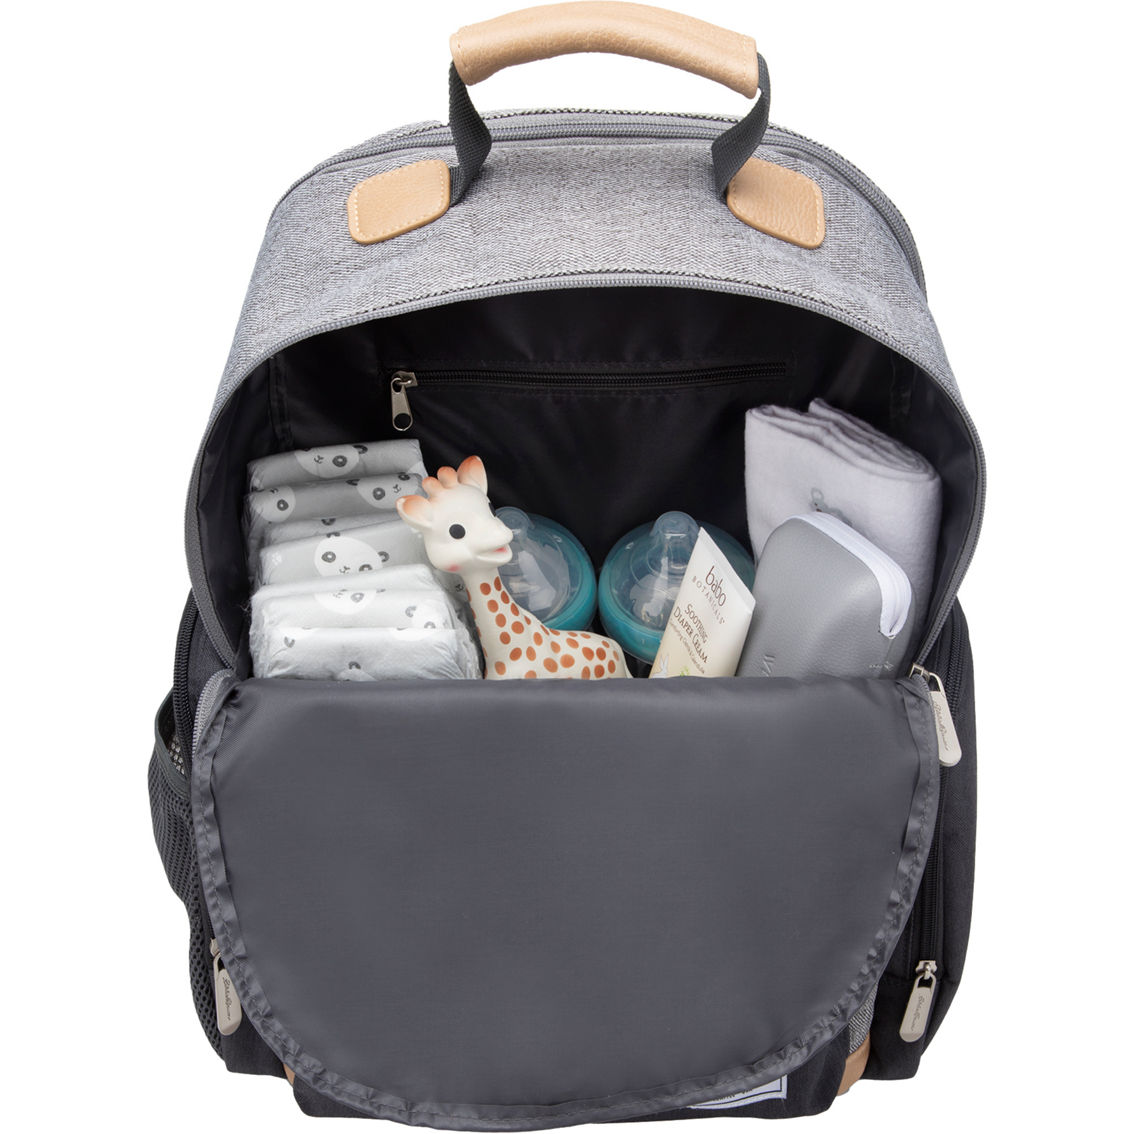 Eddie Bauer Places and Spaces Bridgeport Backpack Diaper Bag - Image 4 of 6